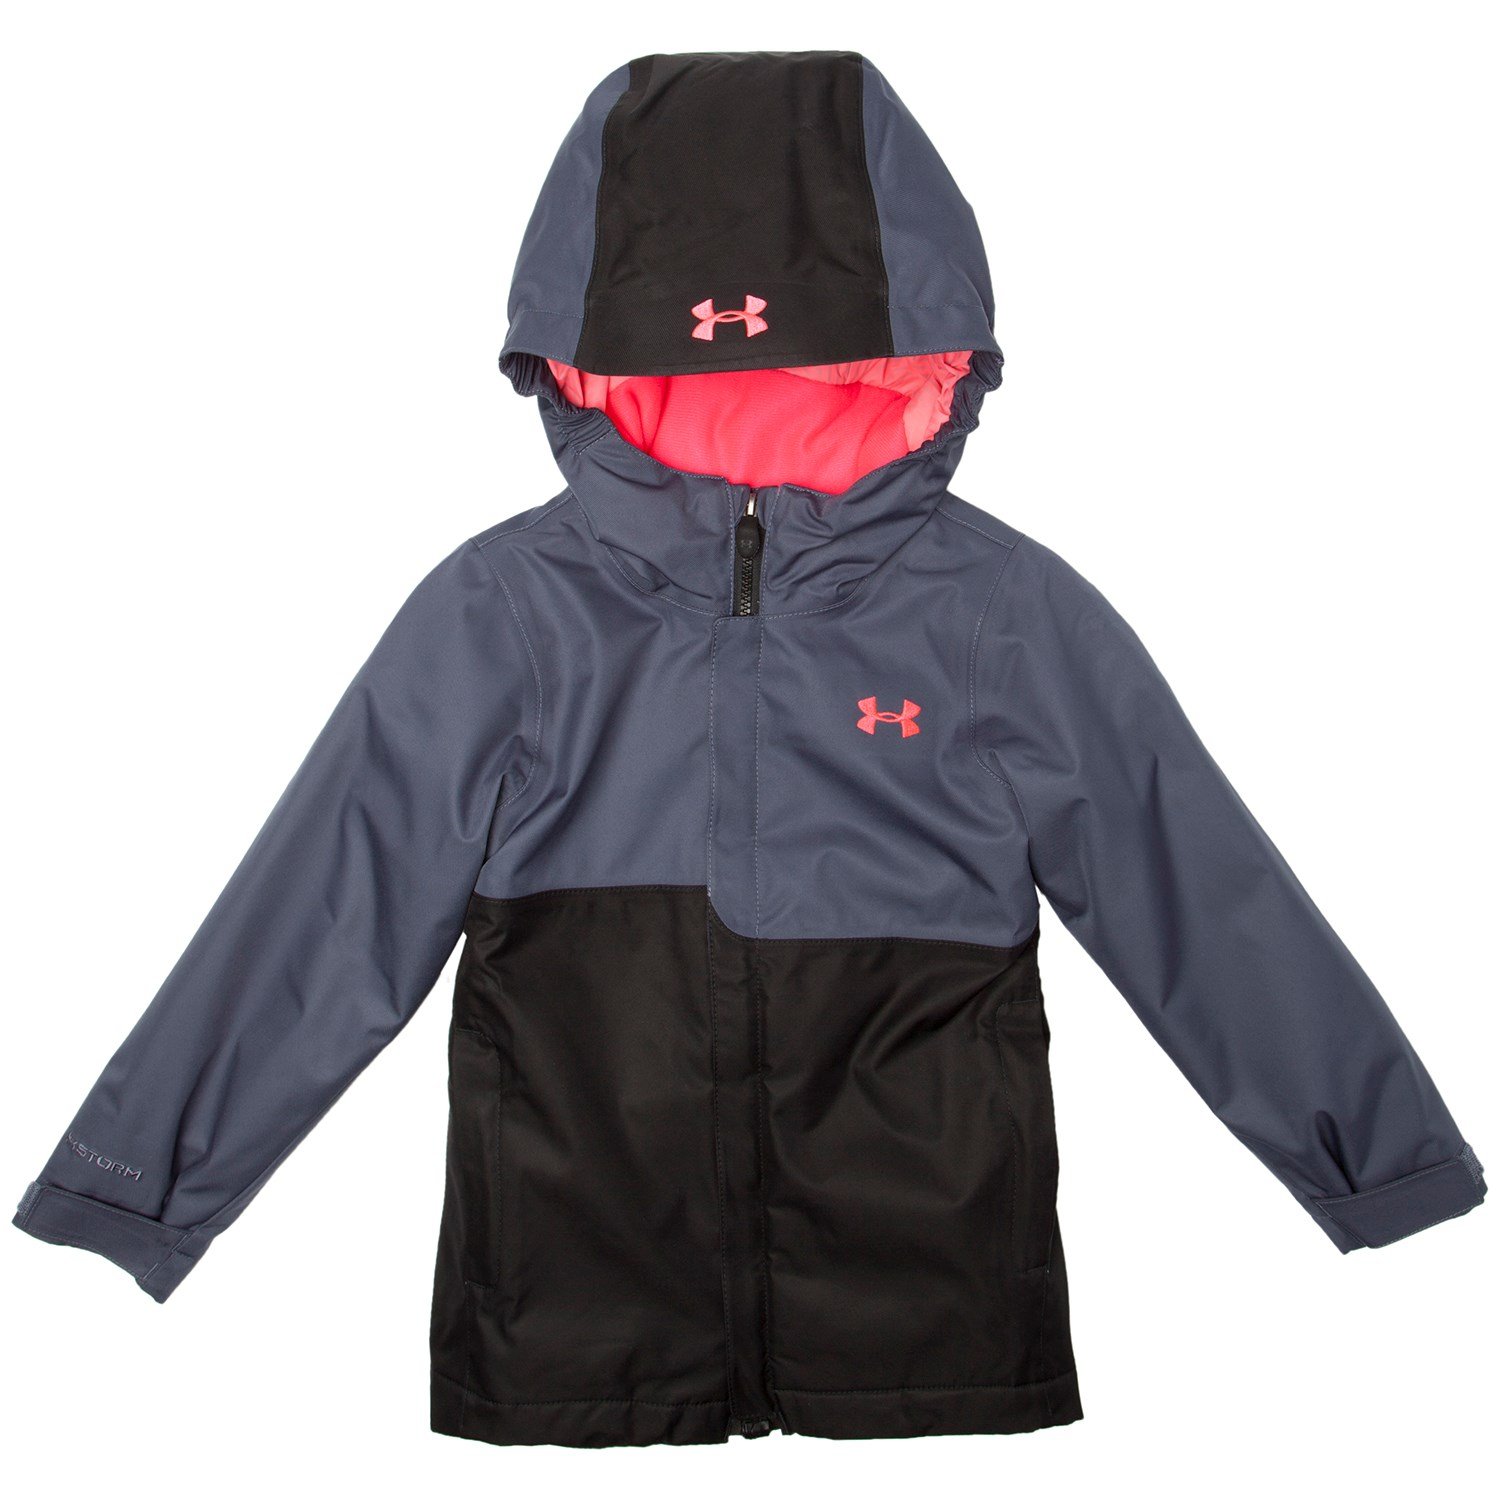 under armour cold gear for girls